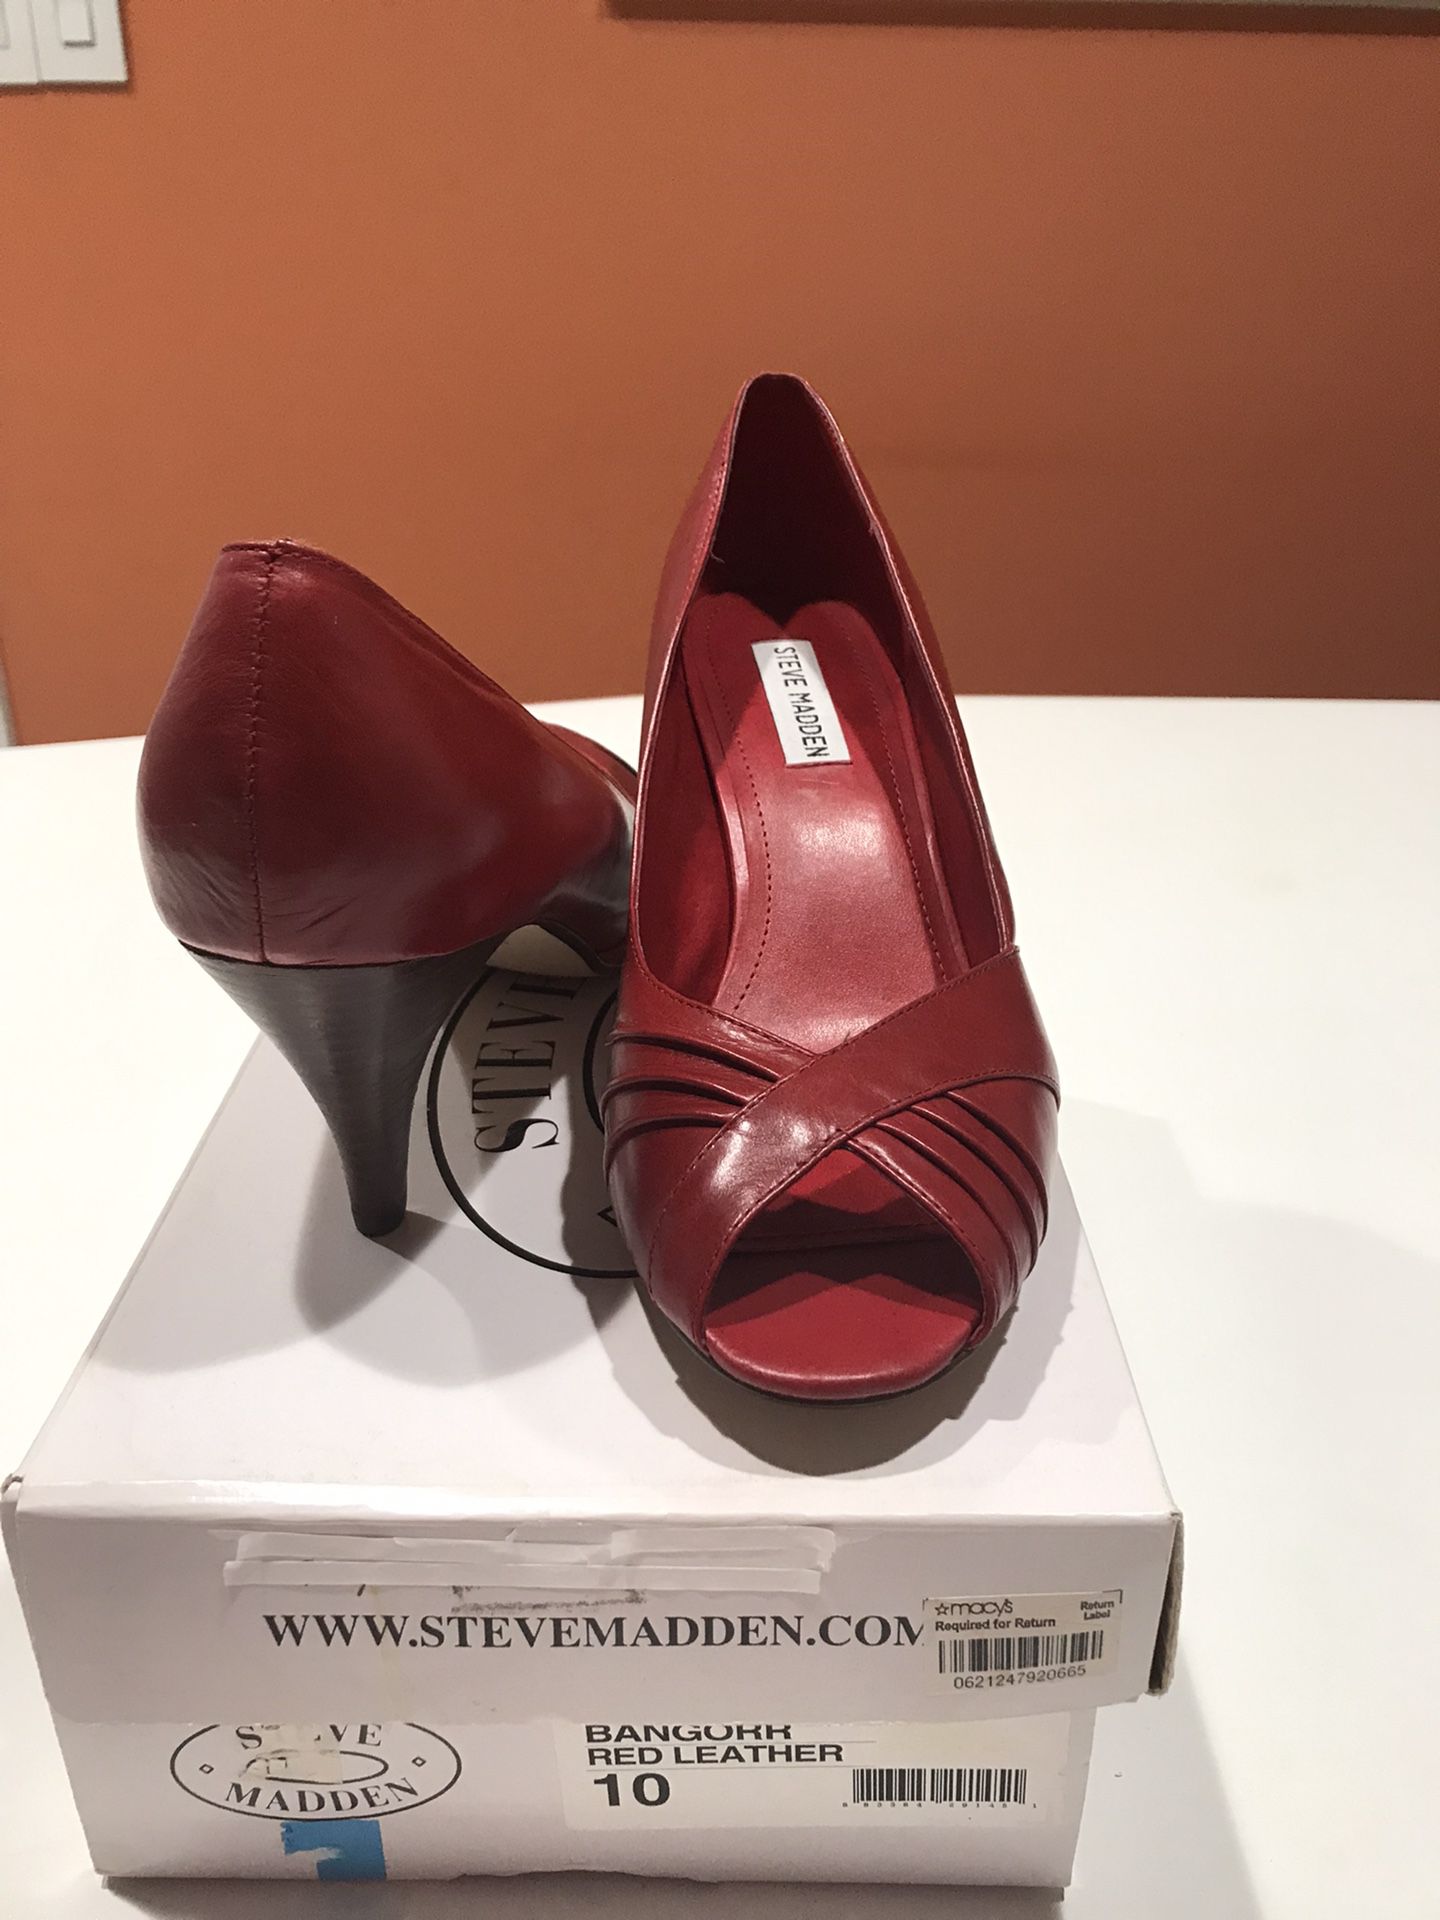 NWT Red All Leather Steven Madden Shoes, 10M